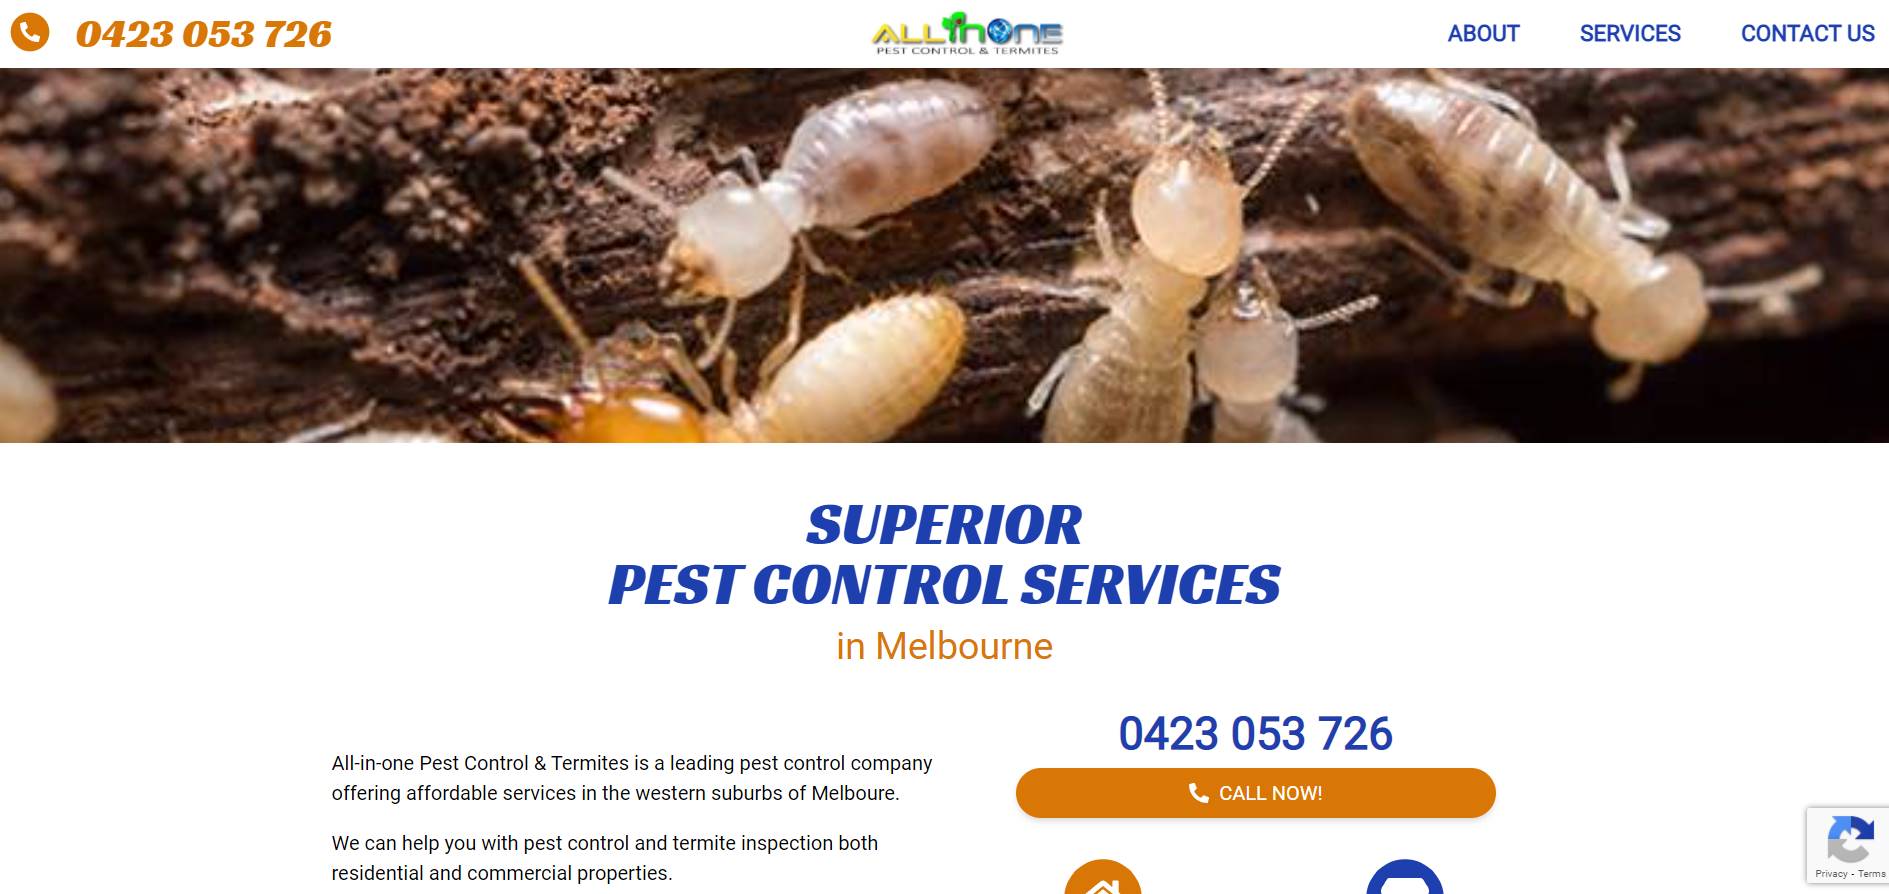 All-in-one Pest Control & Termites